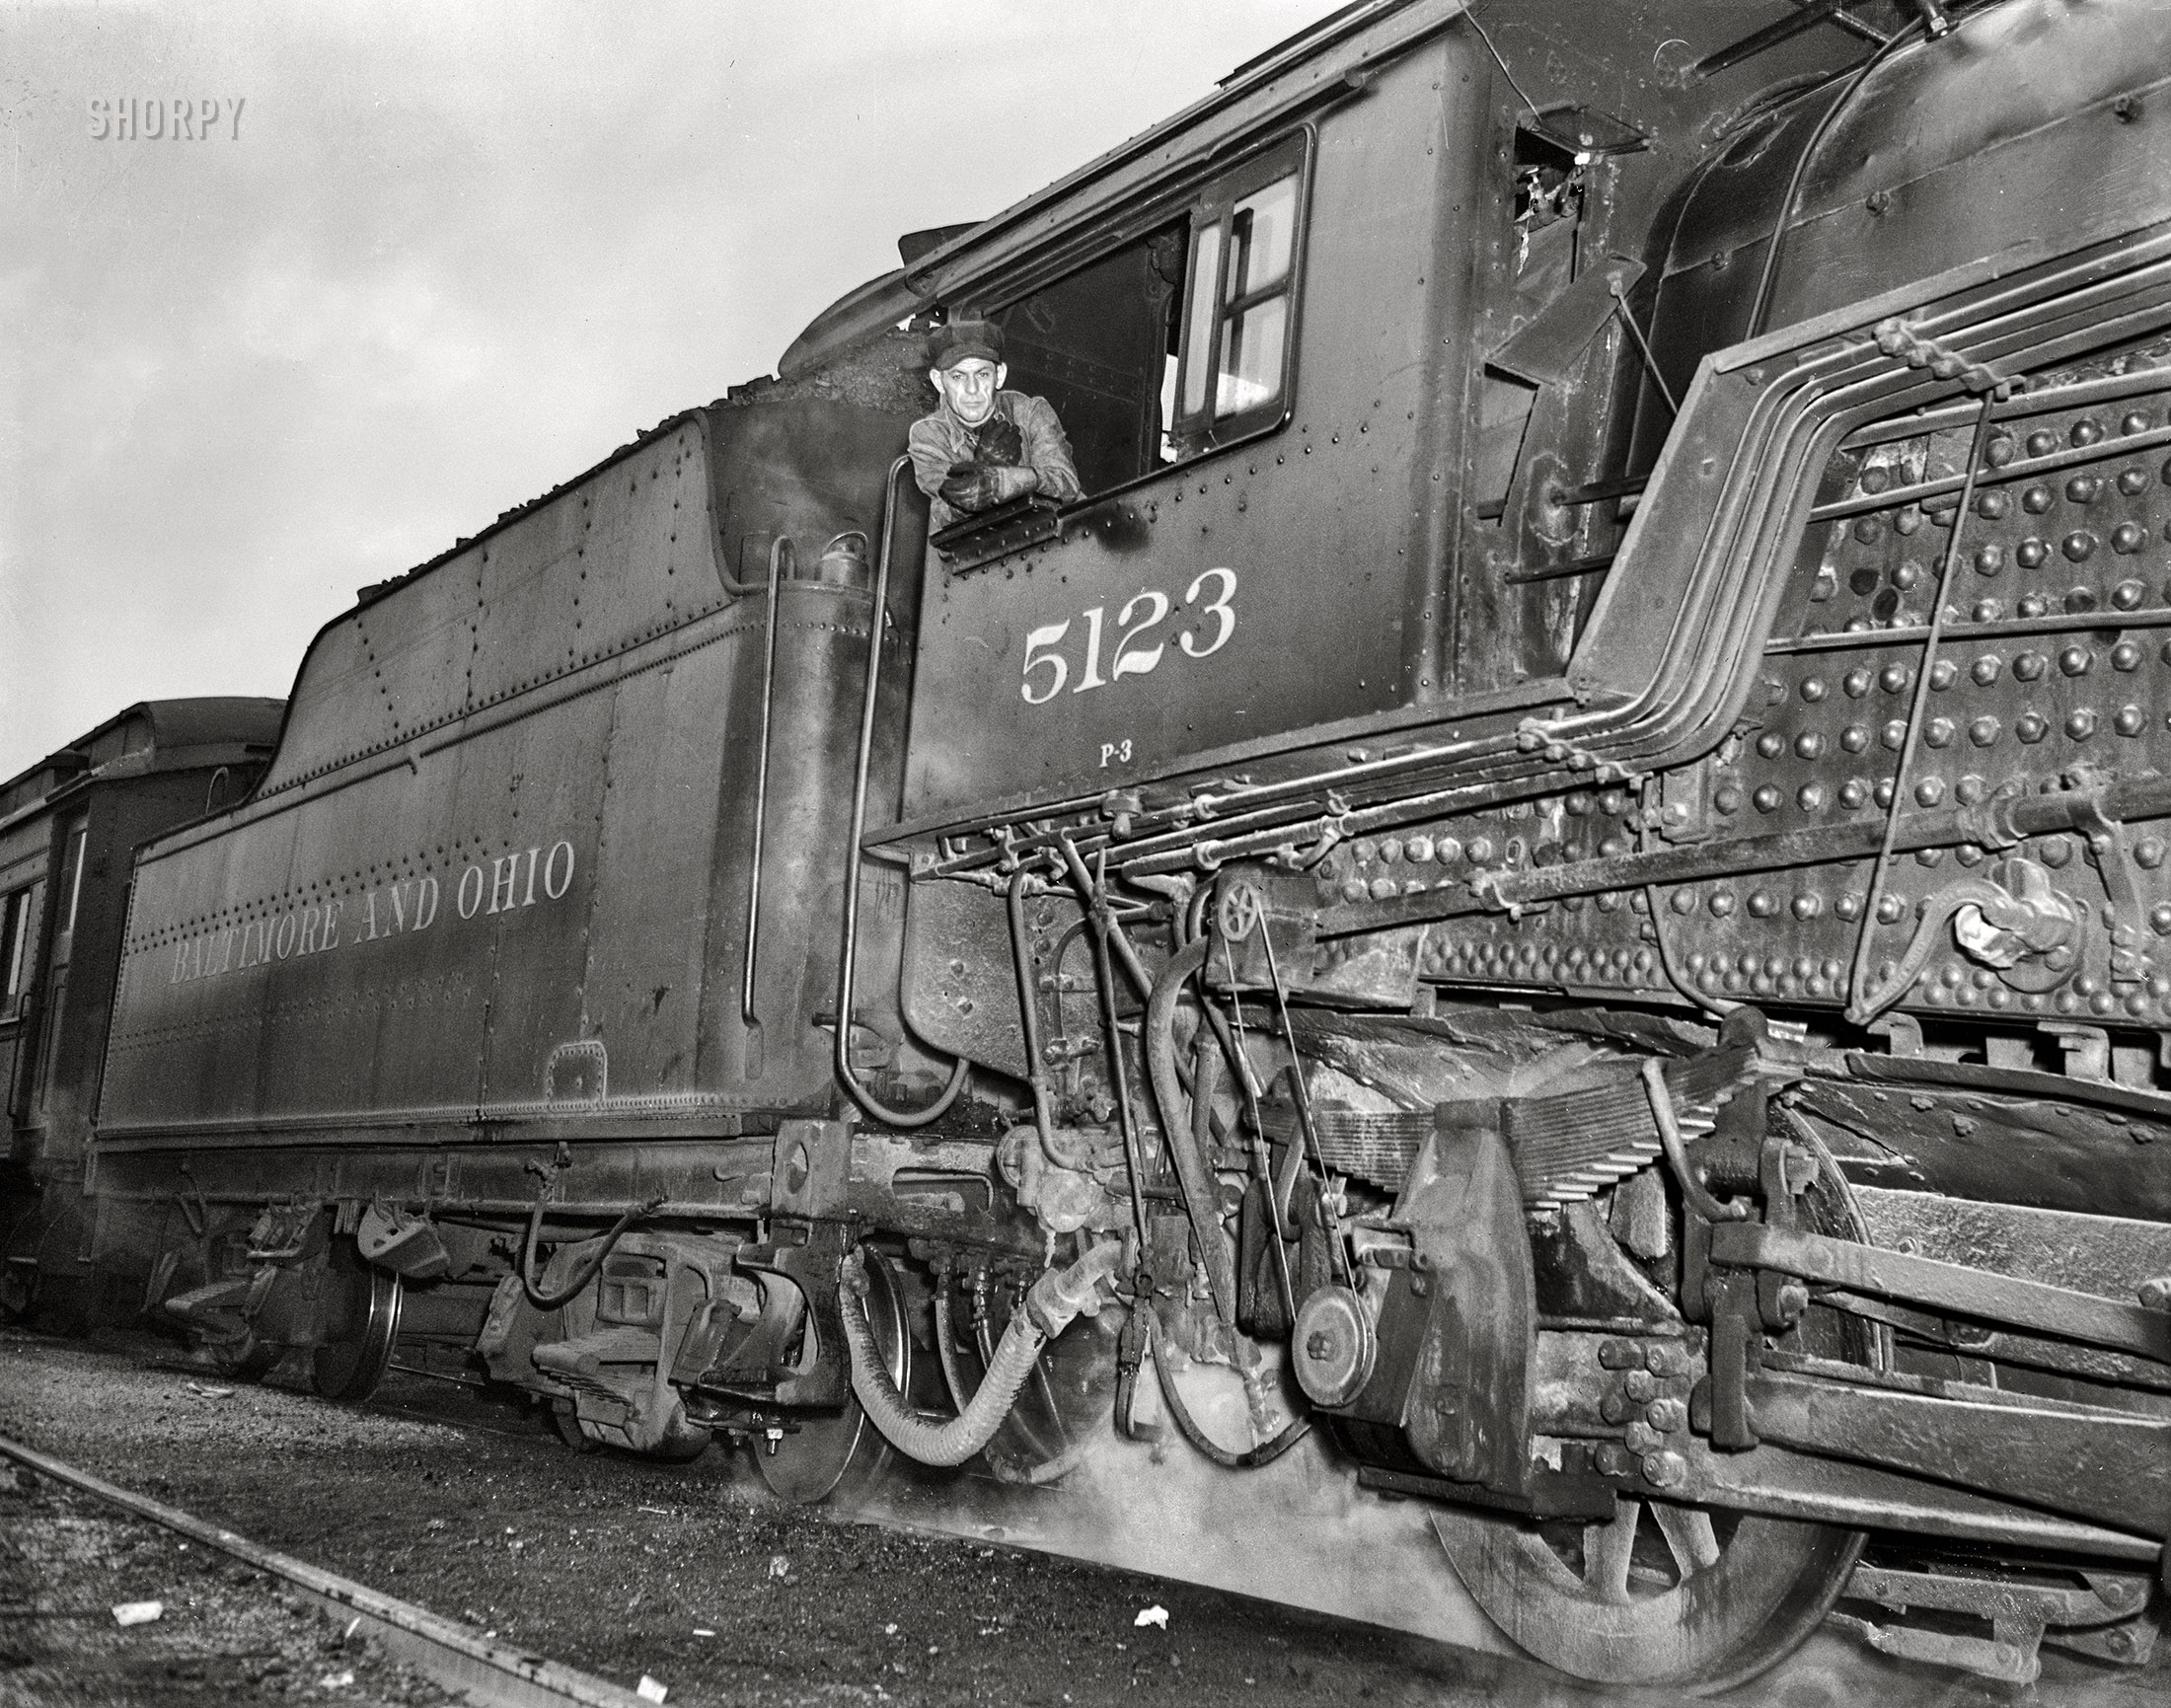 September 1942. "Richwood, West Virginia. An engineer on the Baltimore and Ohio Railroad." 4x5 inch acetate negative by John Collier for the Farm Security Administration. View full size.